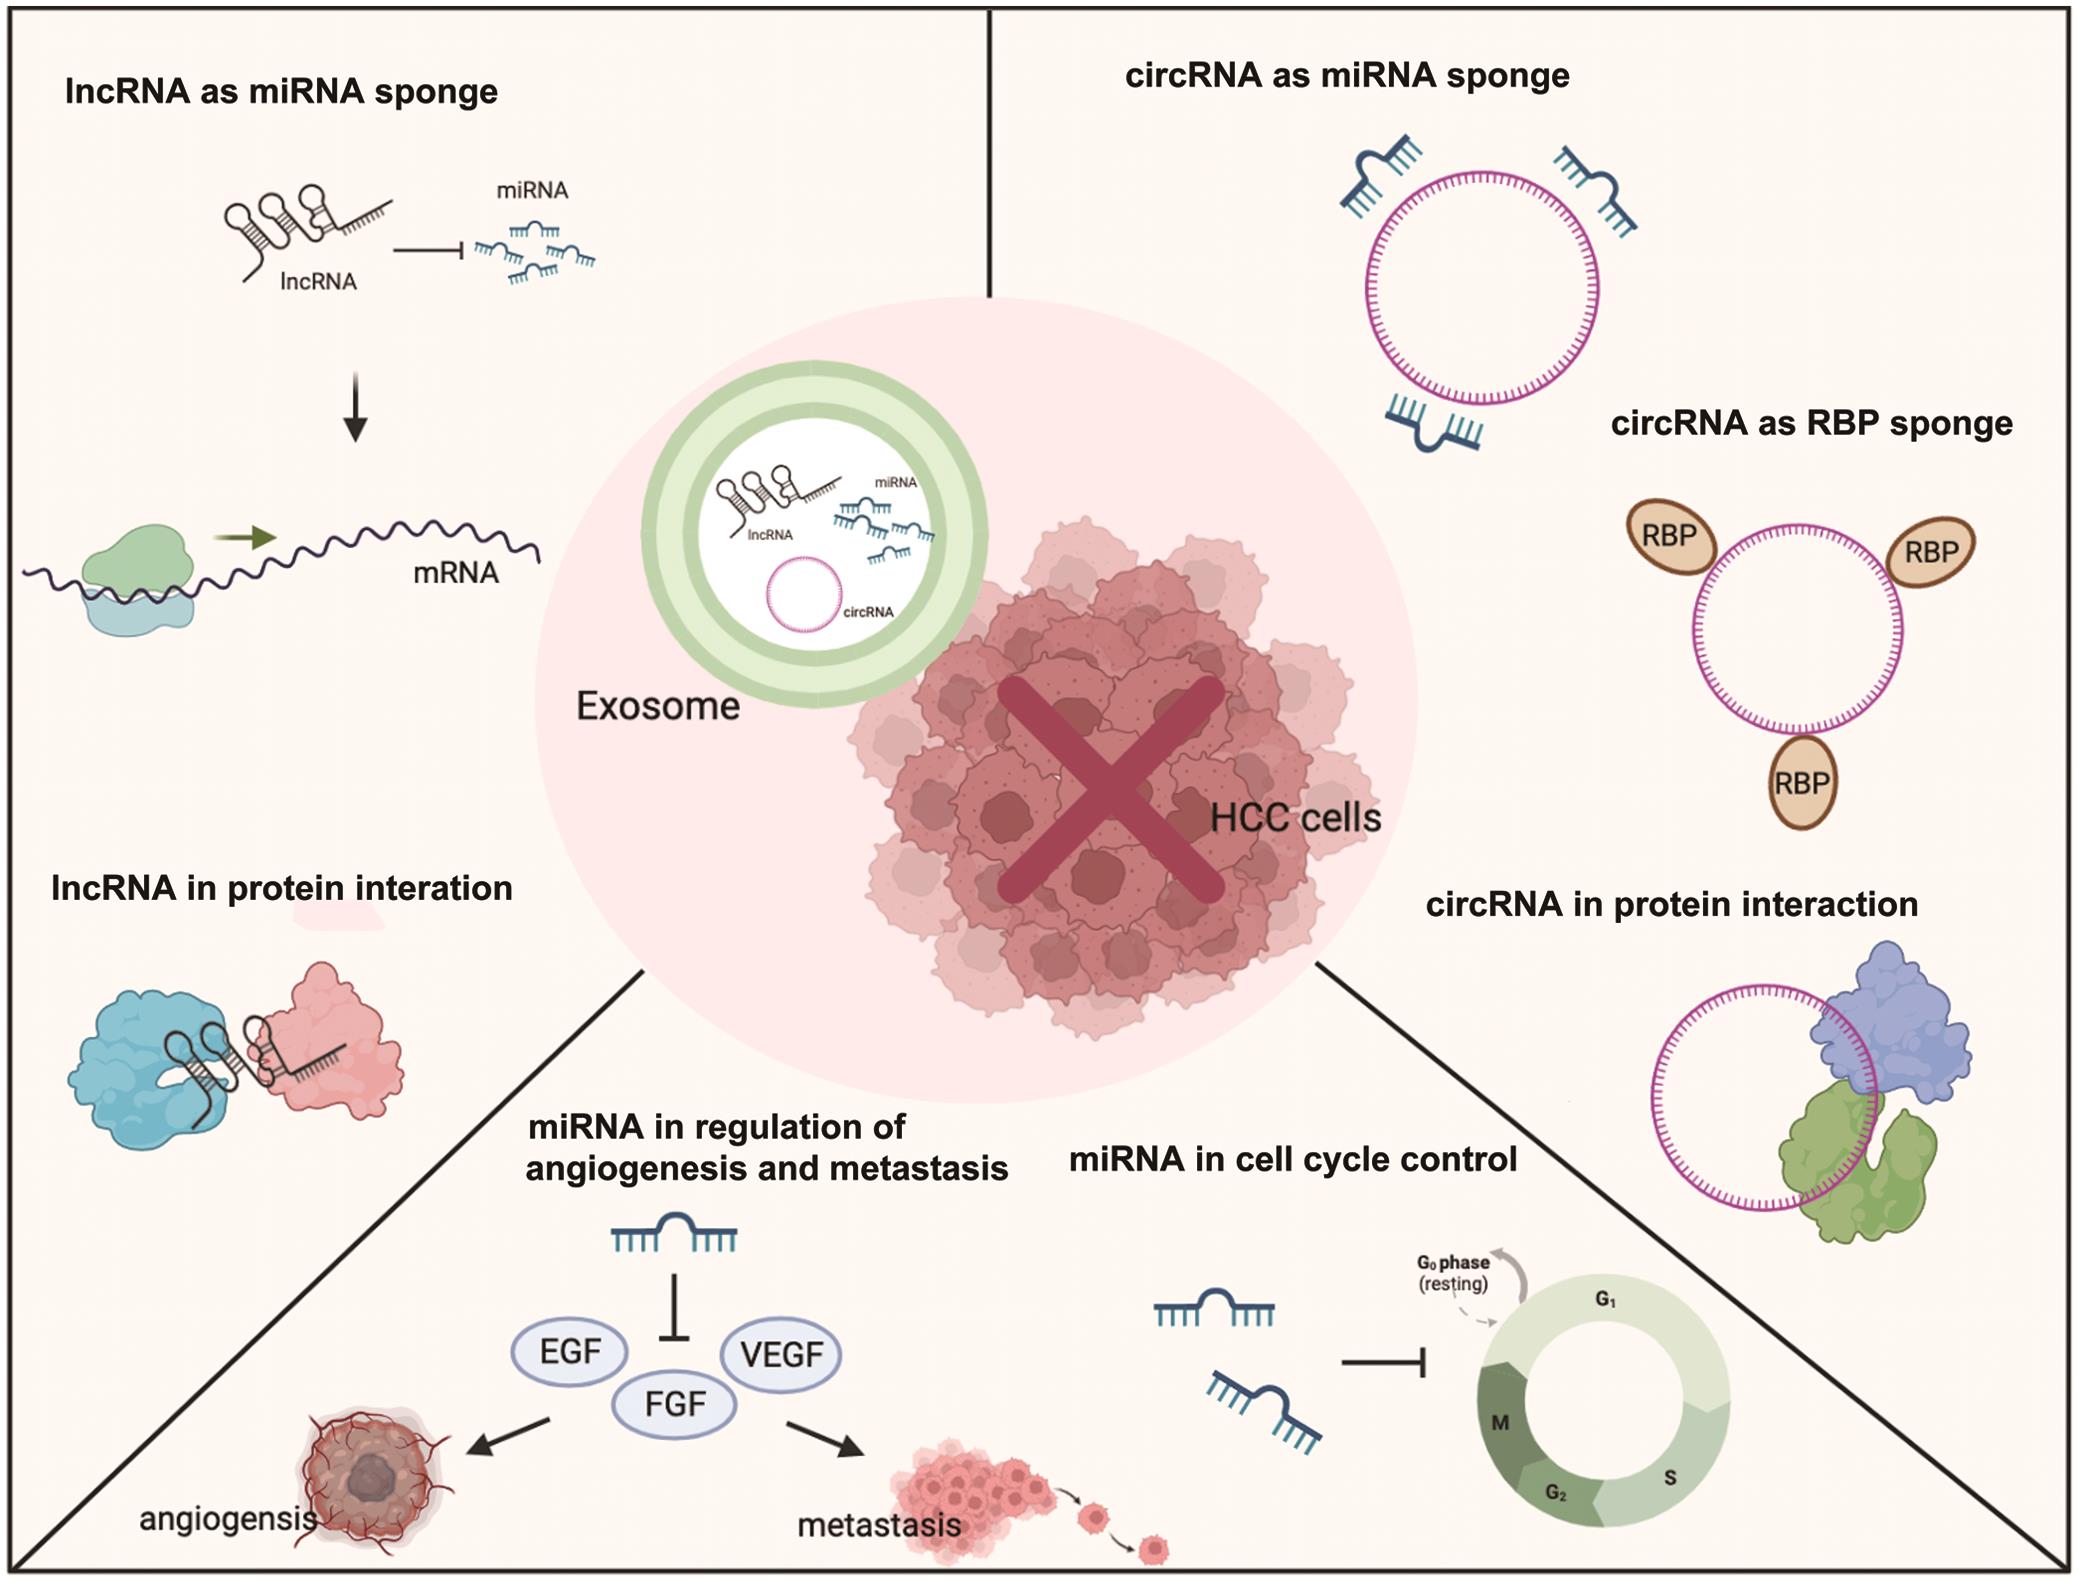 Exosomes can be used as a drug-delivery vehicle for delivering tumor-suppressive non-coding RNAs (long non-coding RNAs, circular RNAs, and micro RNAs) to HCC cells.